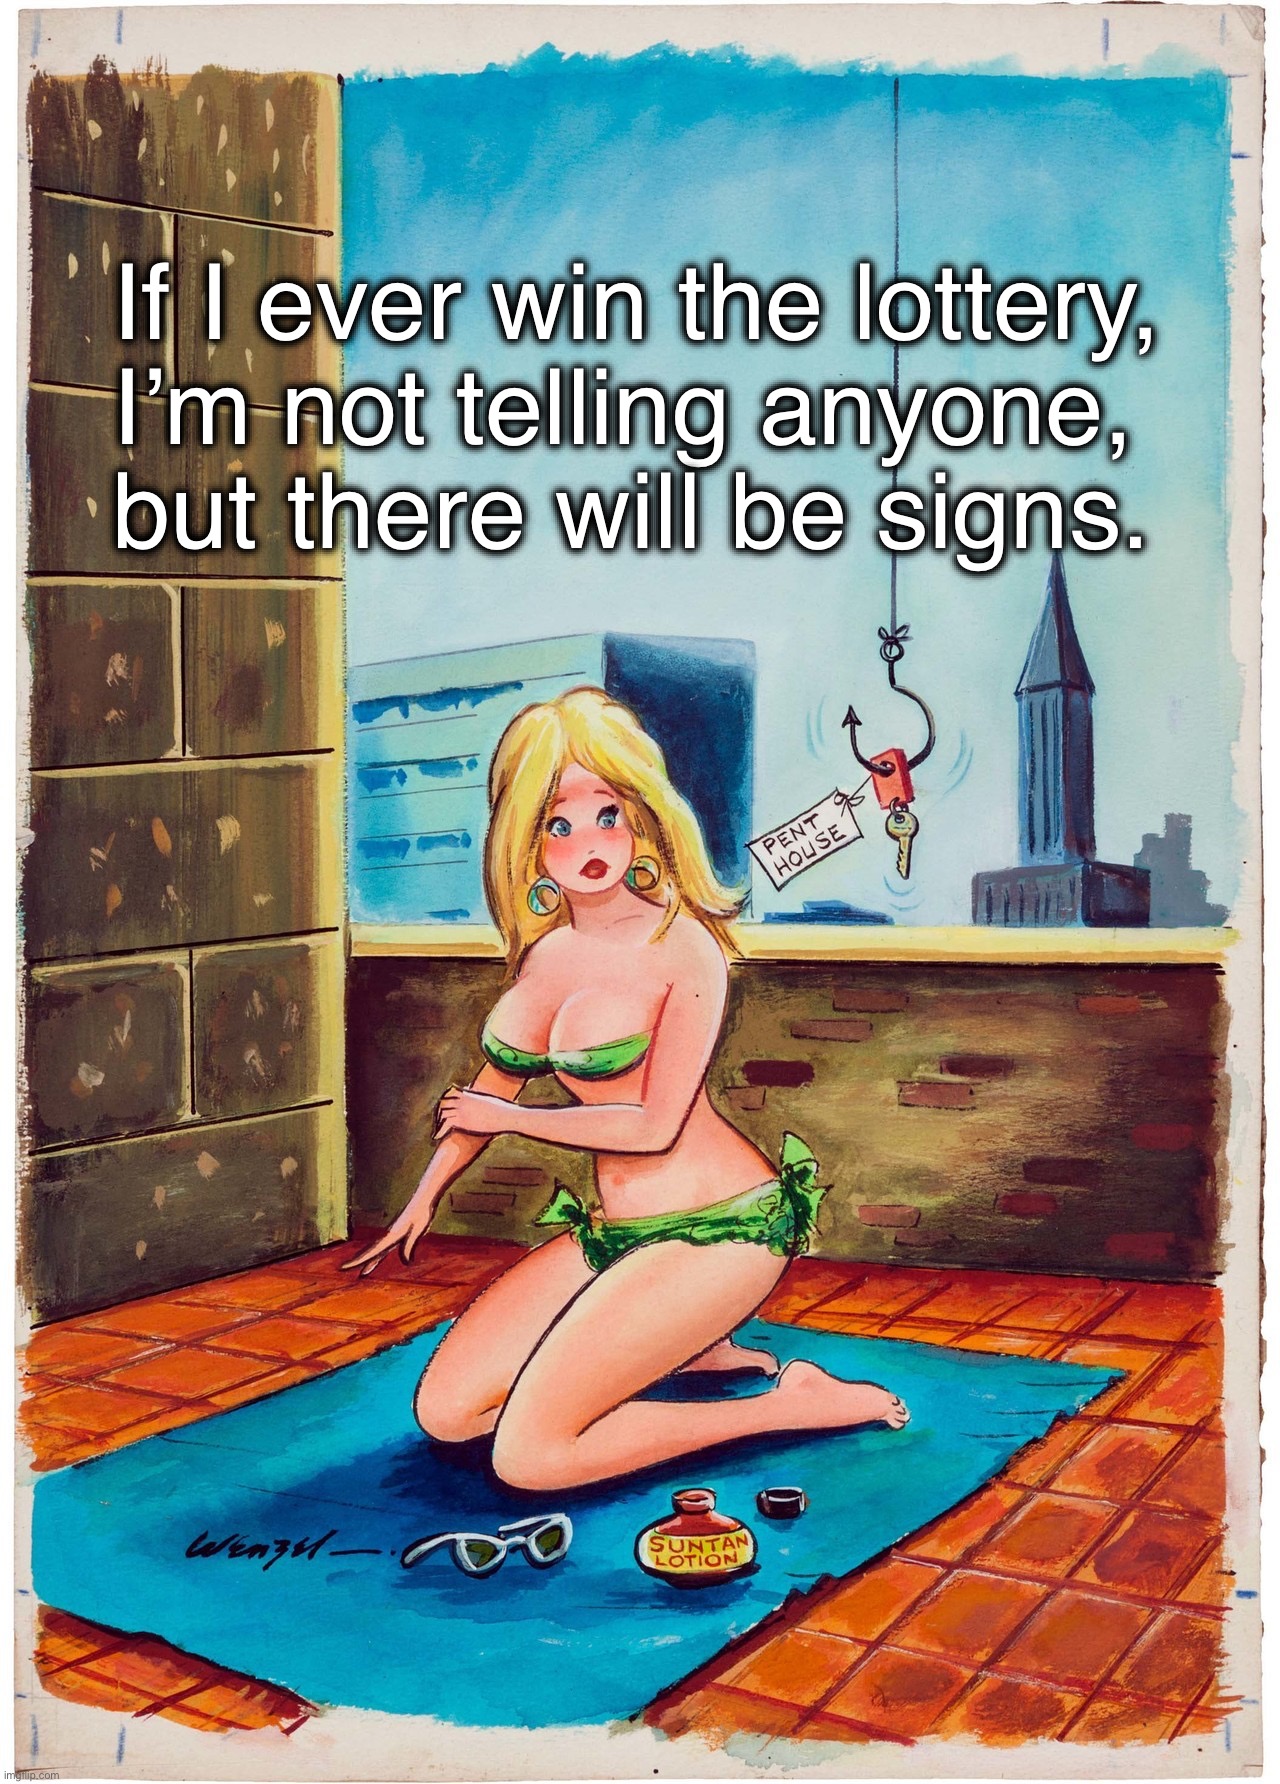 If I ever win the lottery, 
I’m not telling anyone, 
but there will be signs. | image tagged in funny memes,adult humor,memes,lottery | made w/ Imgflip meme maker